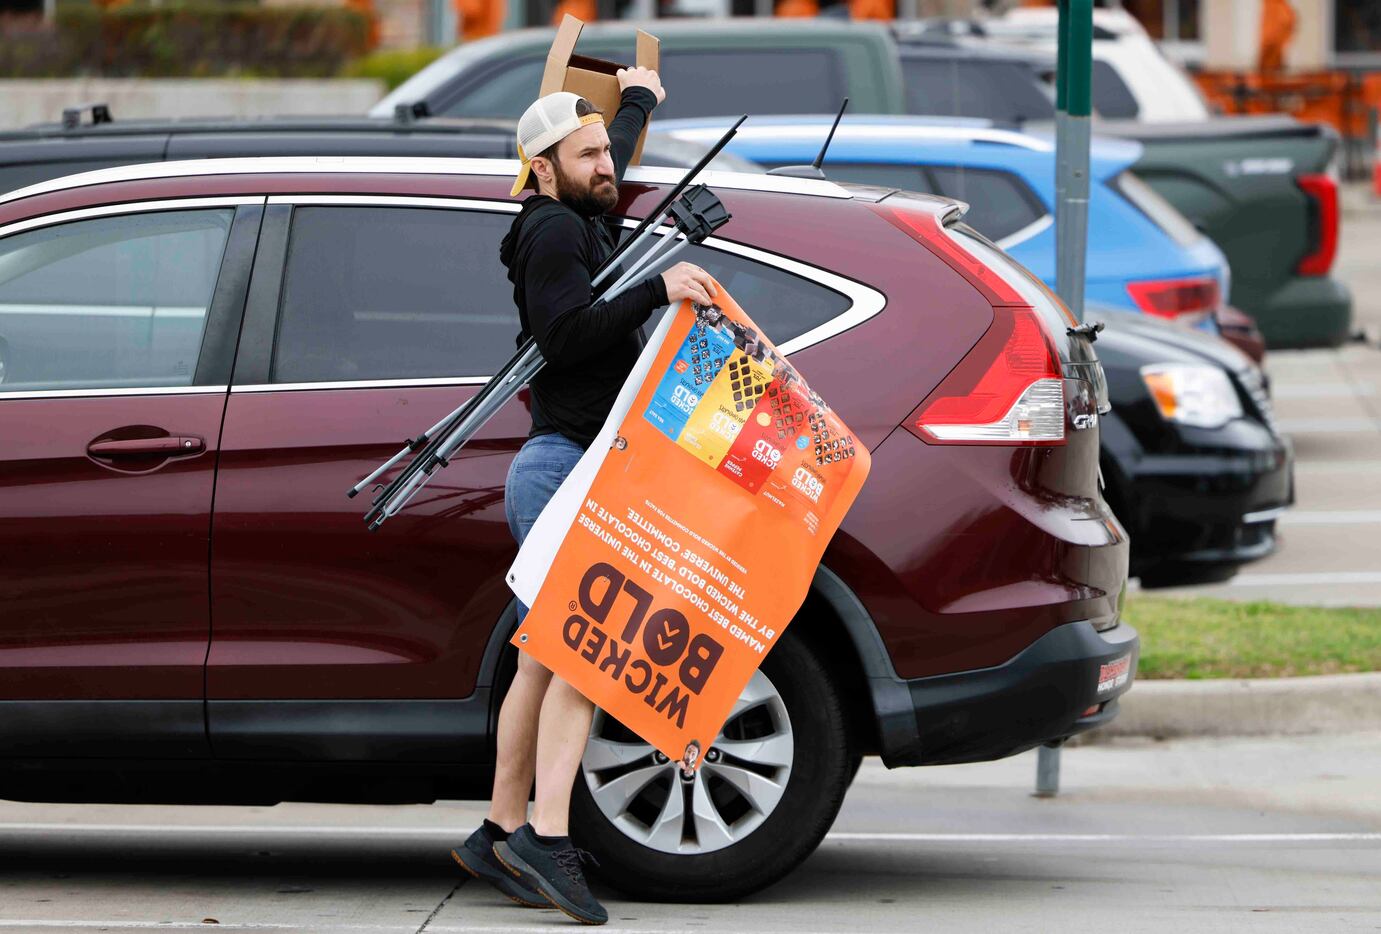 Deric Cahill exits his SUV carrying the Wicked Bold banner he sets up in the entrance of a...